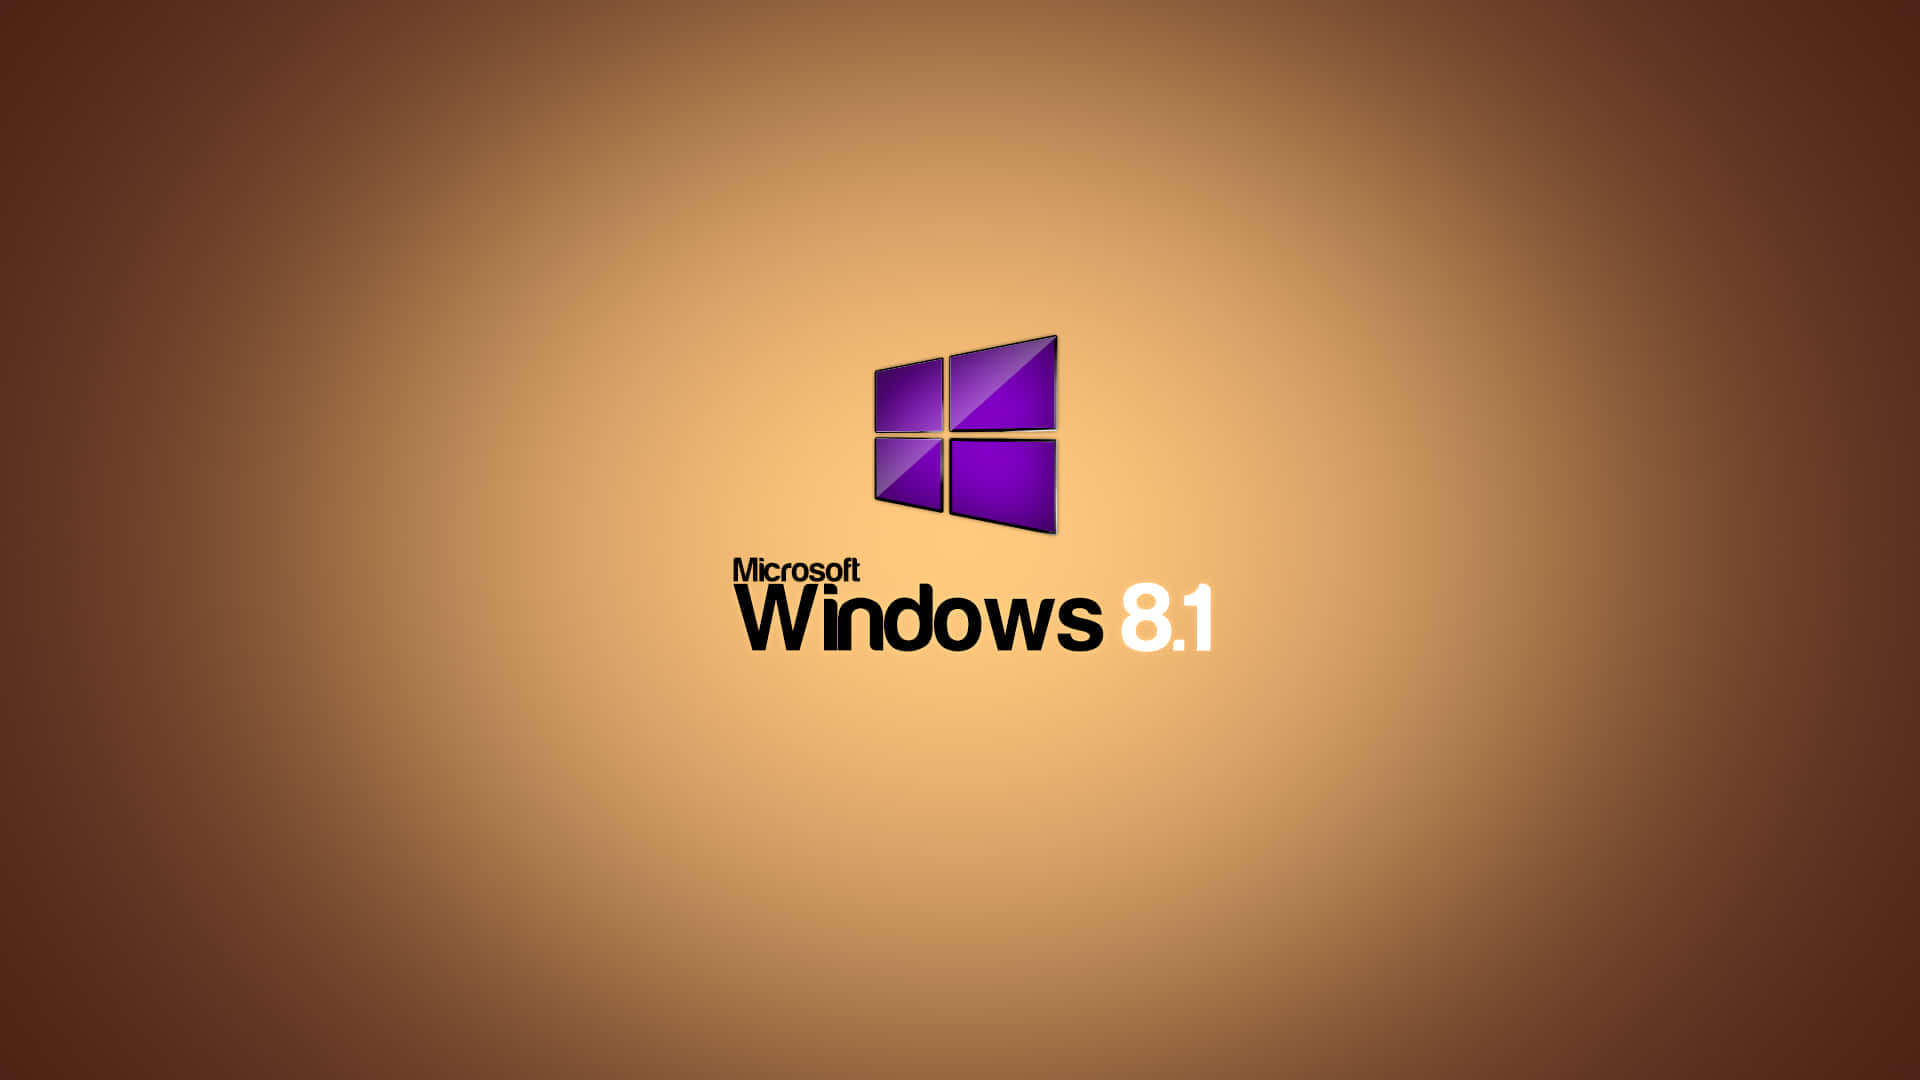 Enjoy The Full Potential Of Your Pc With Windows 8.1 Background